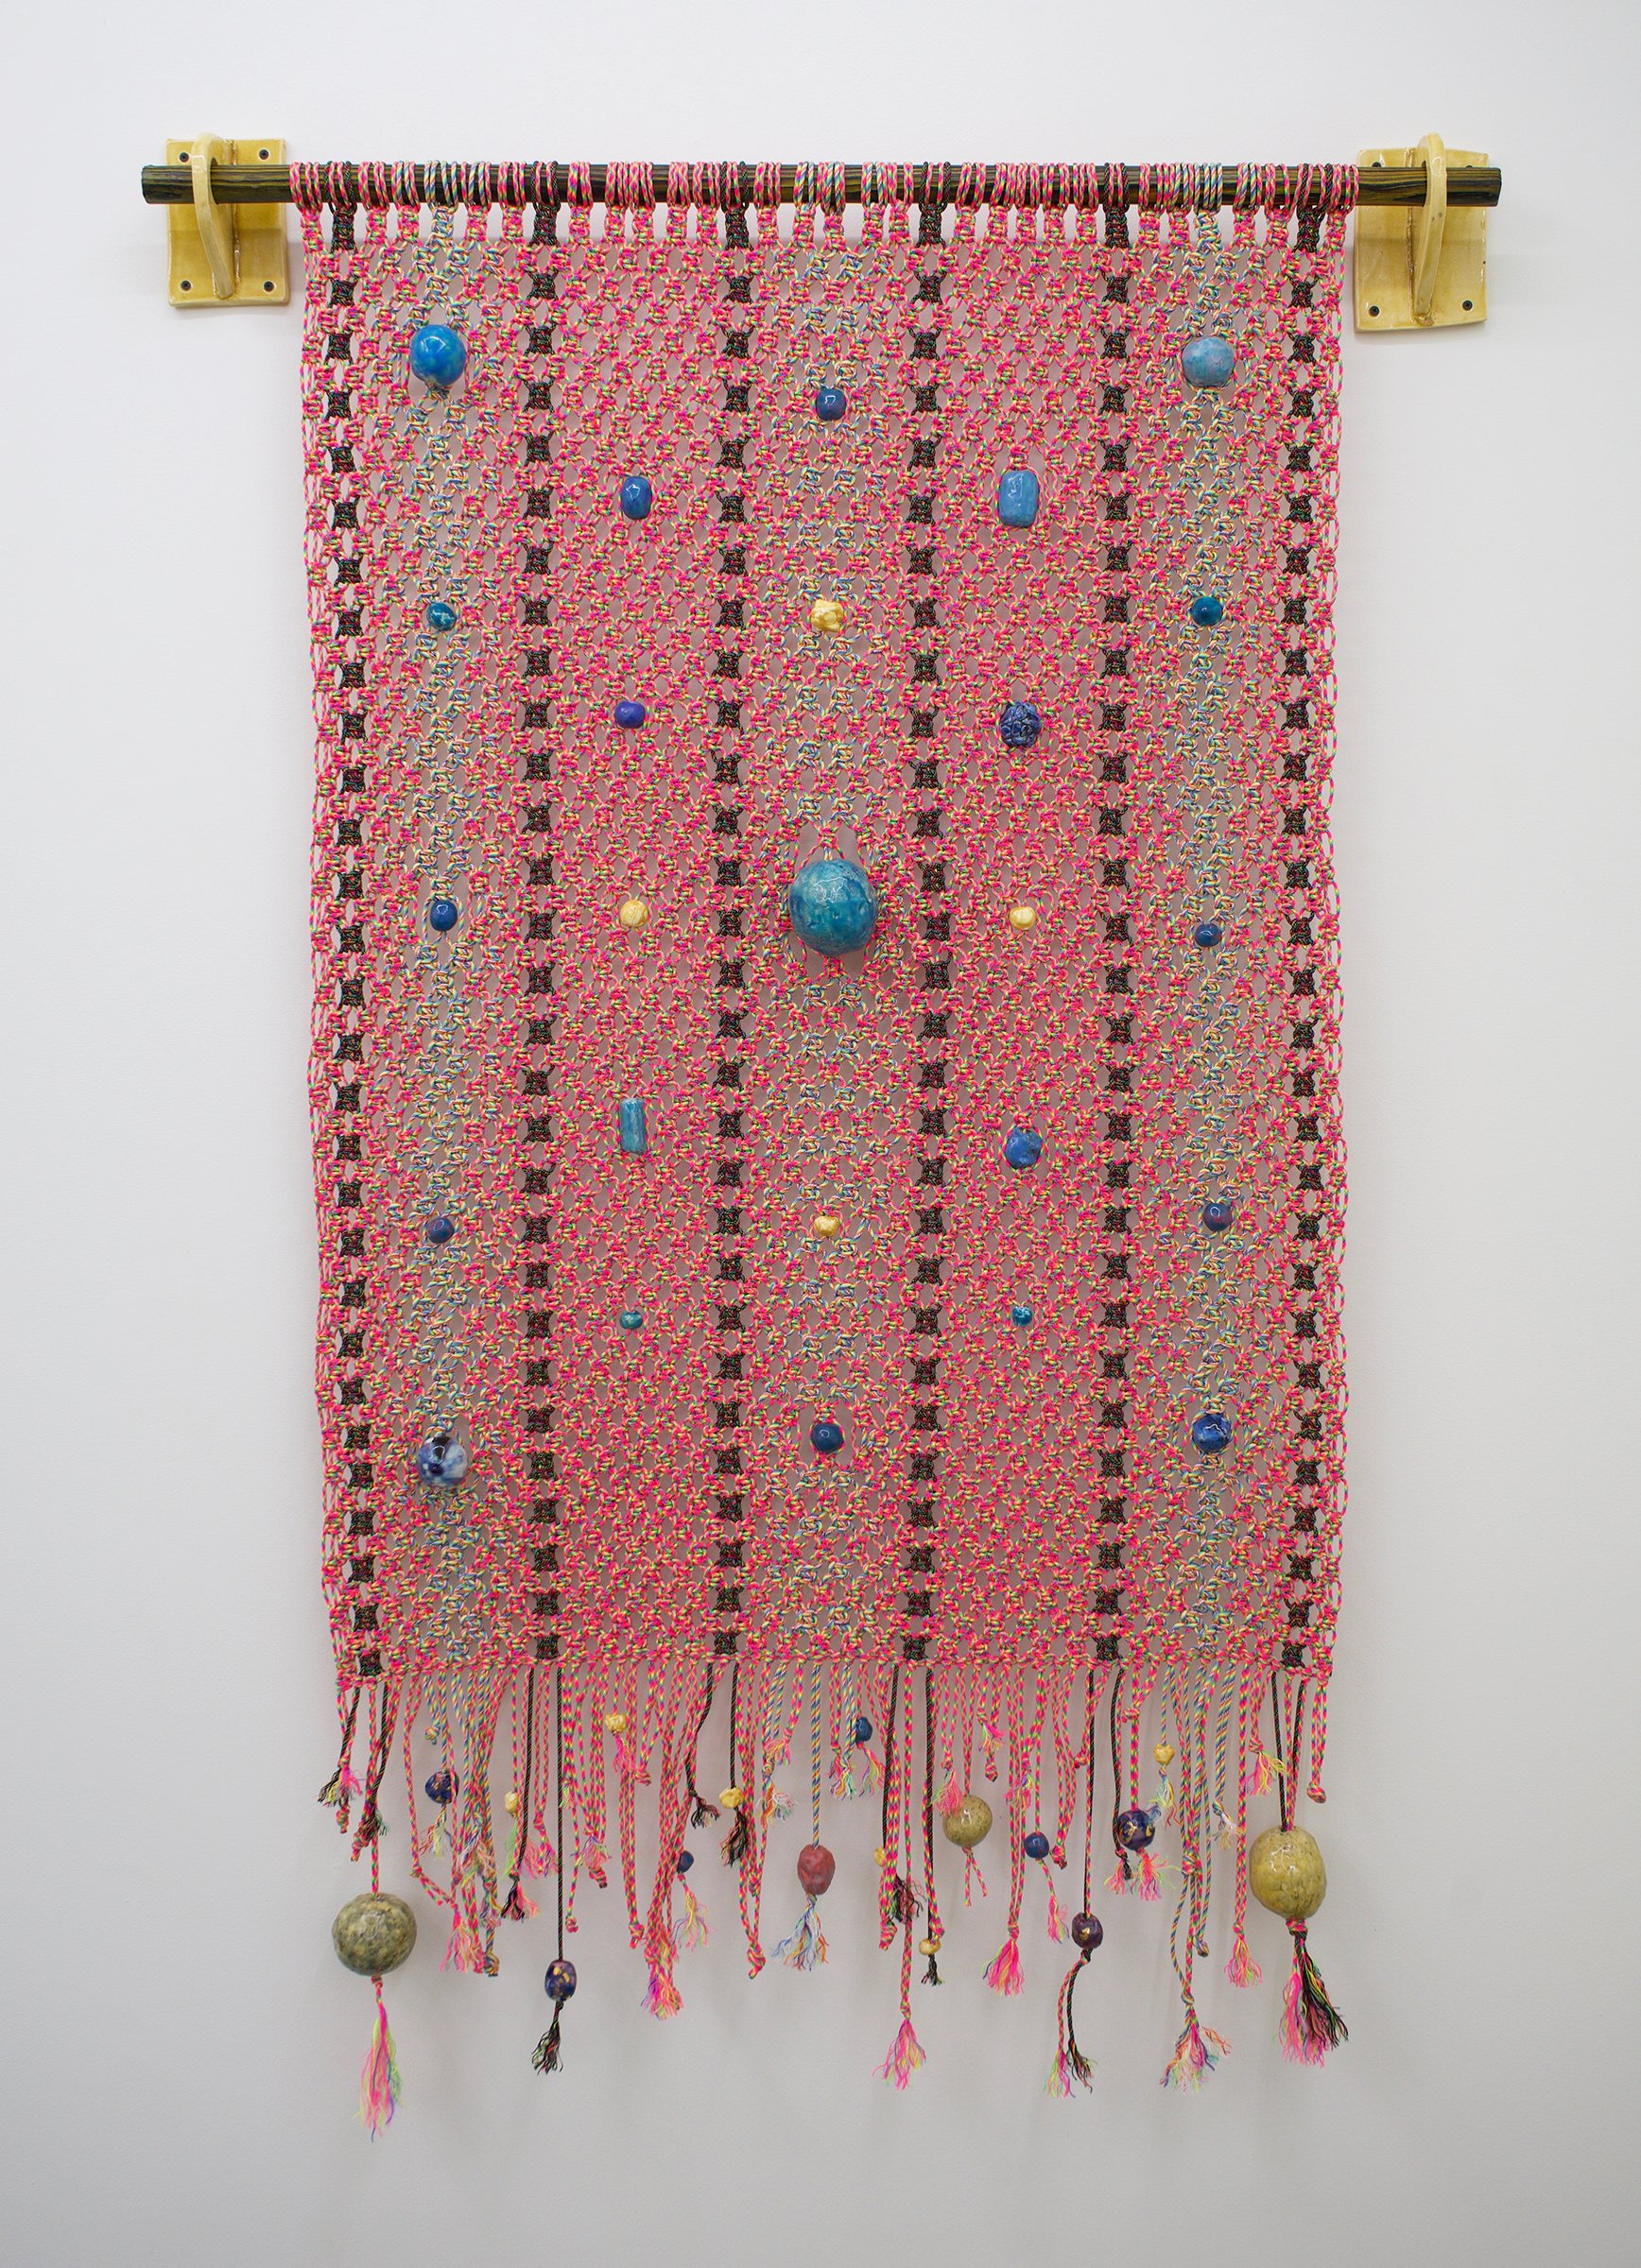   Pink Think , 2022 Paracord, glazed stoneware beads, glazed porcelain beads with gold luster, glazed stoneware wall mounts, charred and stained wood 72” x 48” 